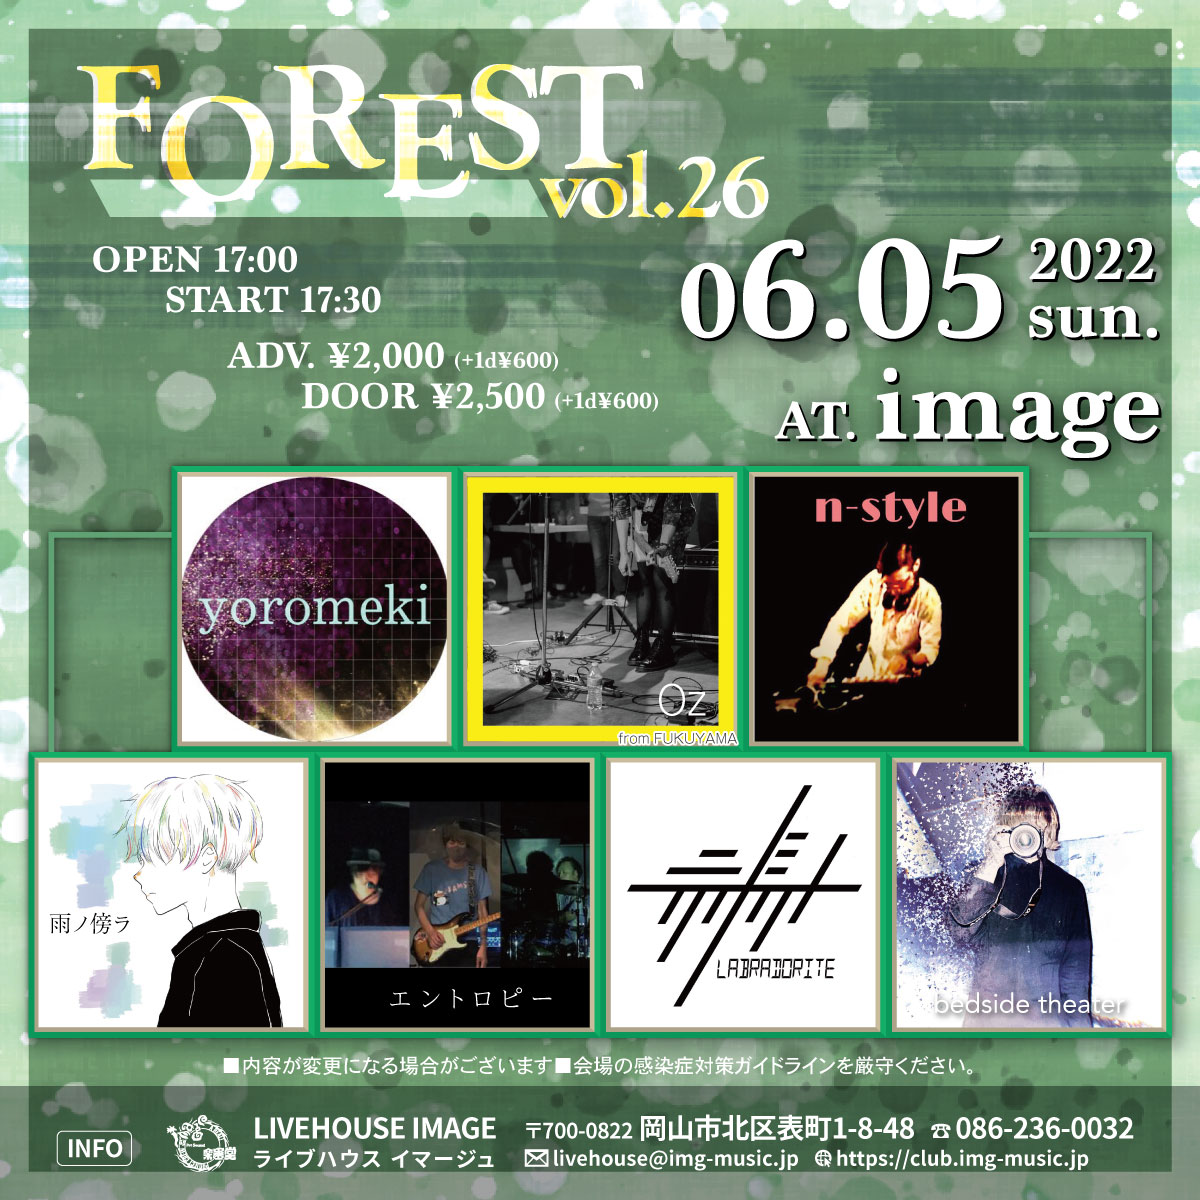 FOREST vol.26